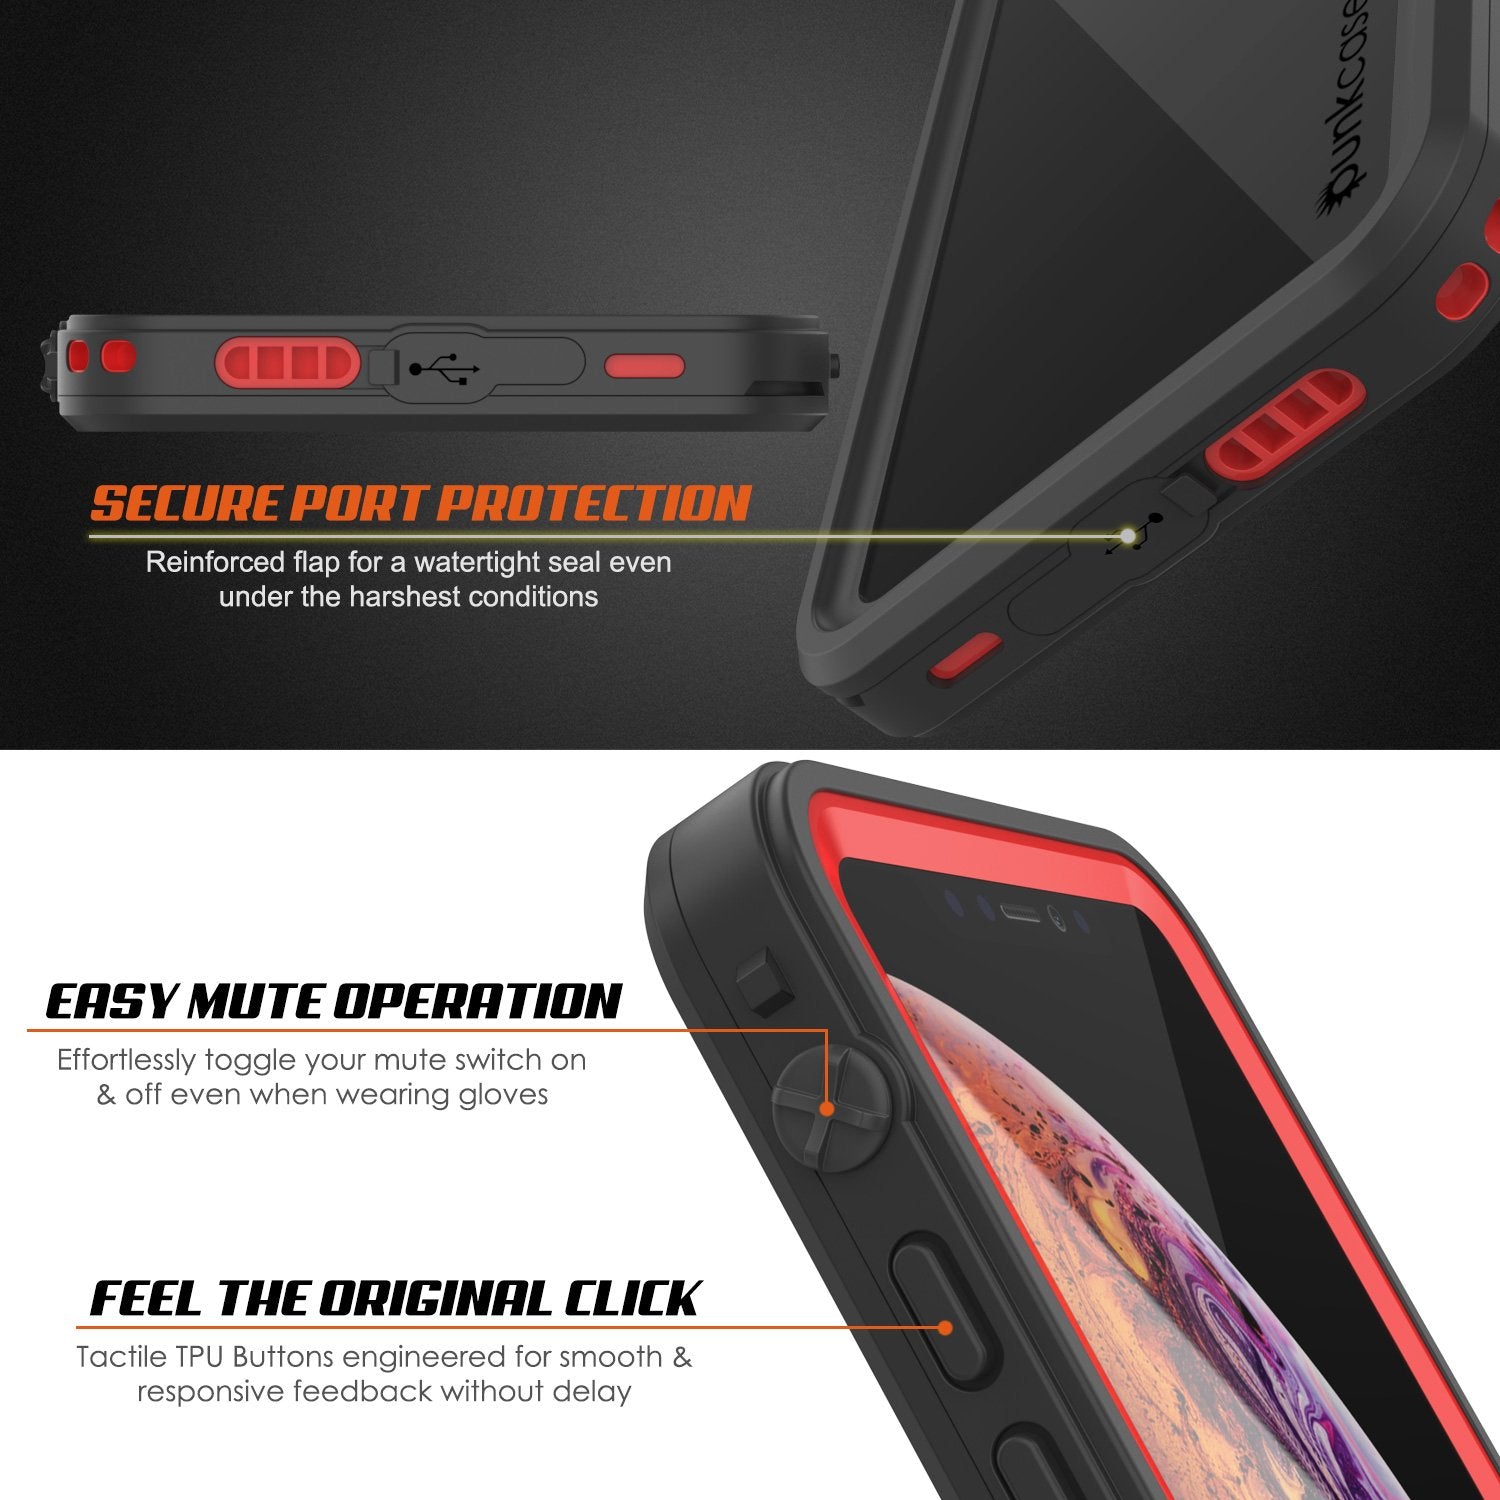 iPhone XR Waterproof Case, Punkcase [Extreme Series] Armor Cover W/ Built In Screen Protector [Red] - PunkCase NZ